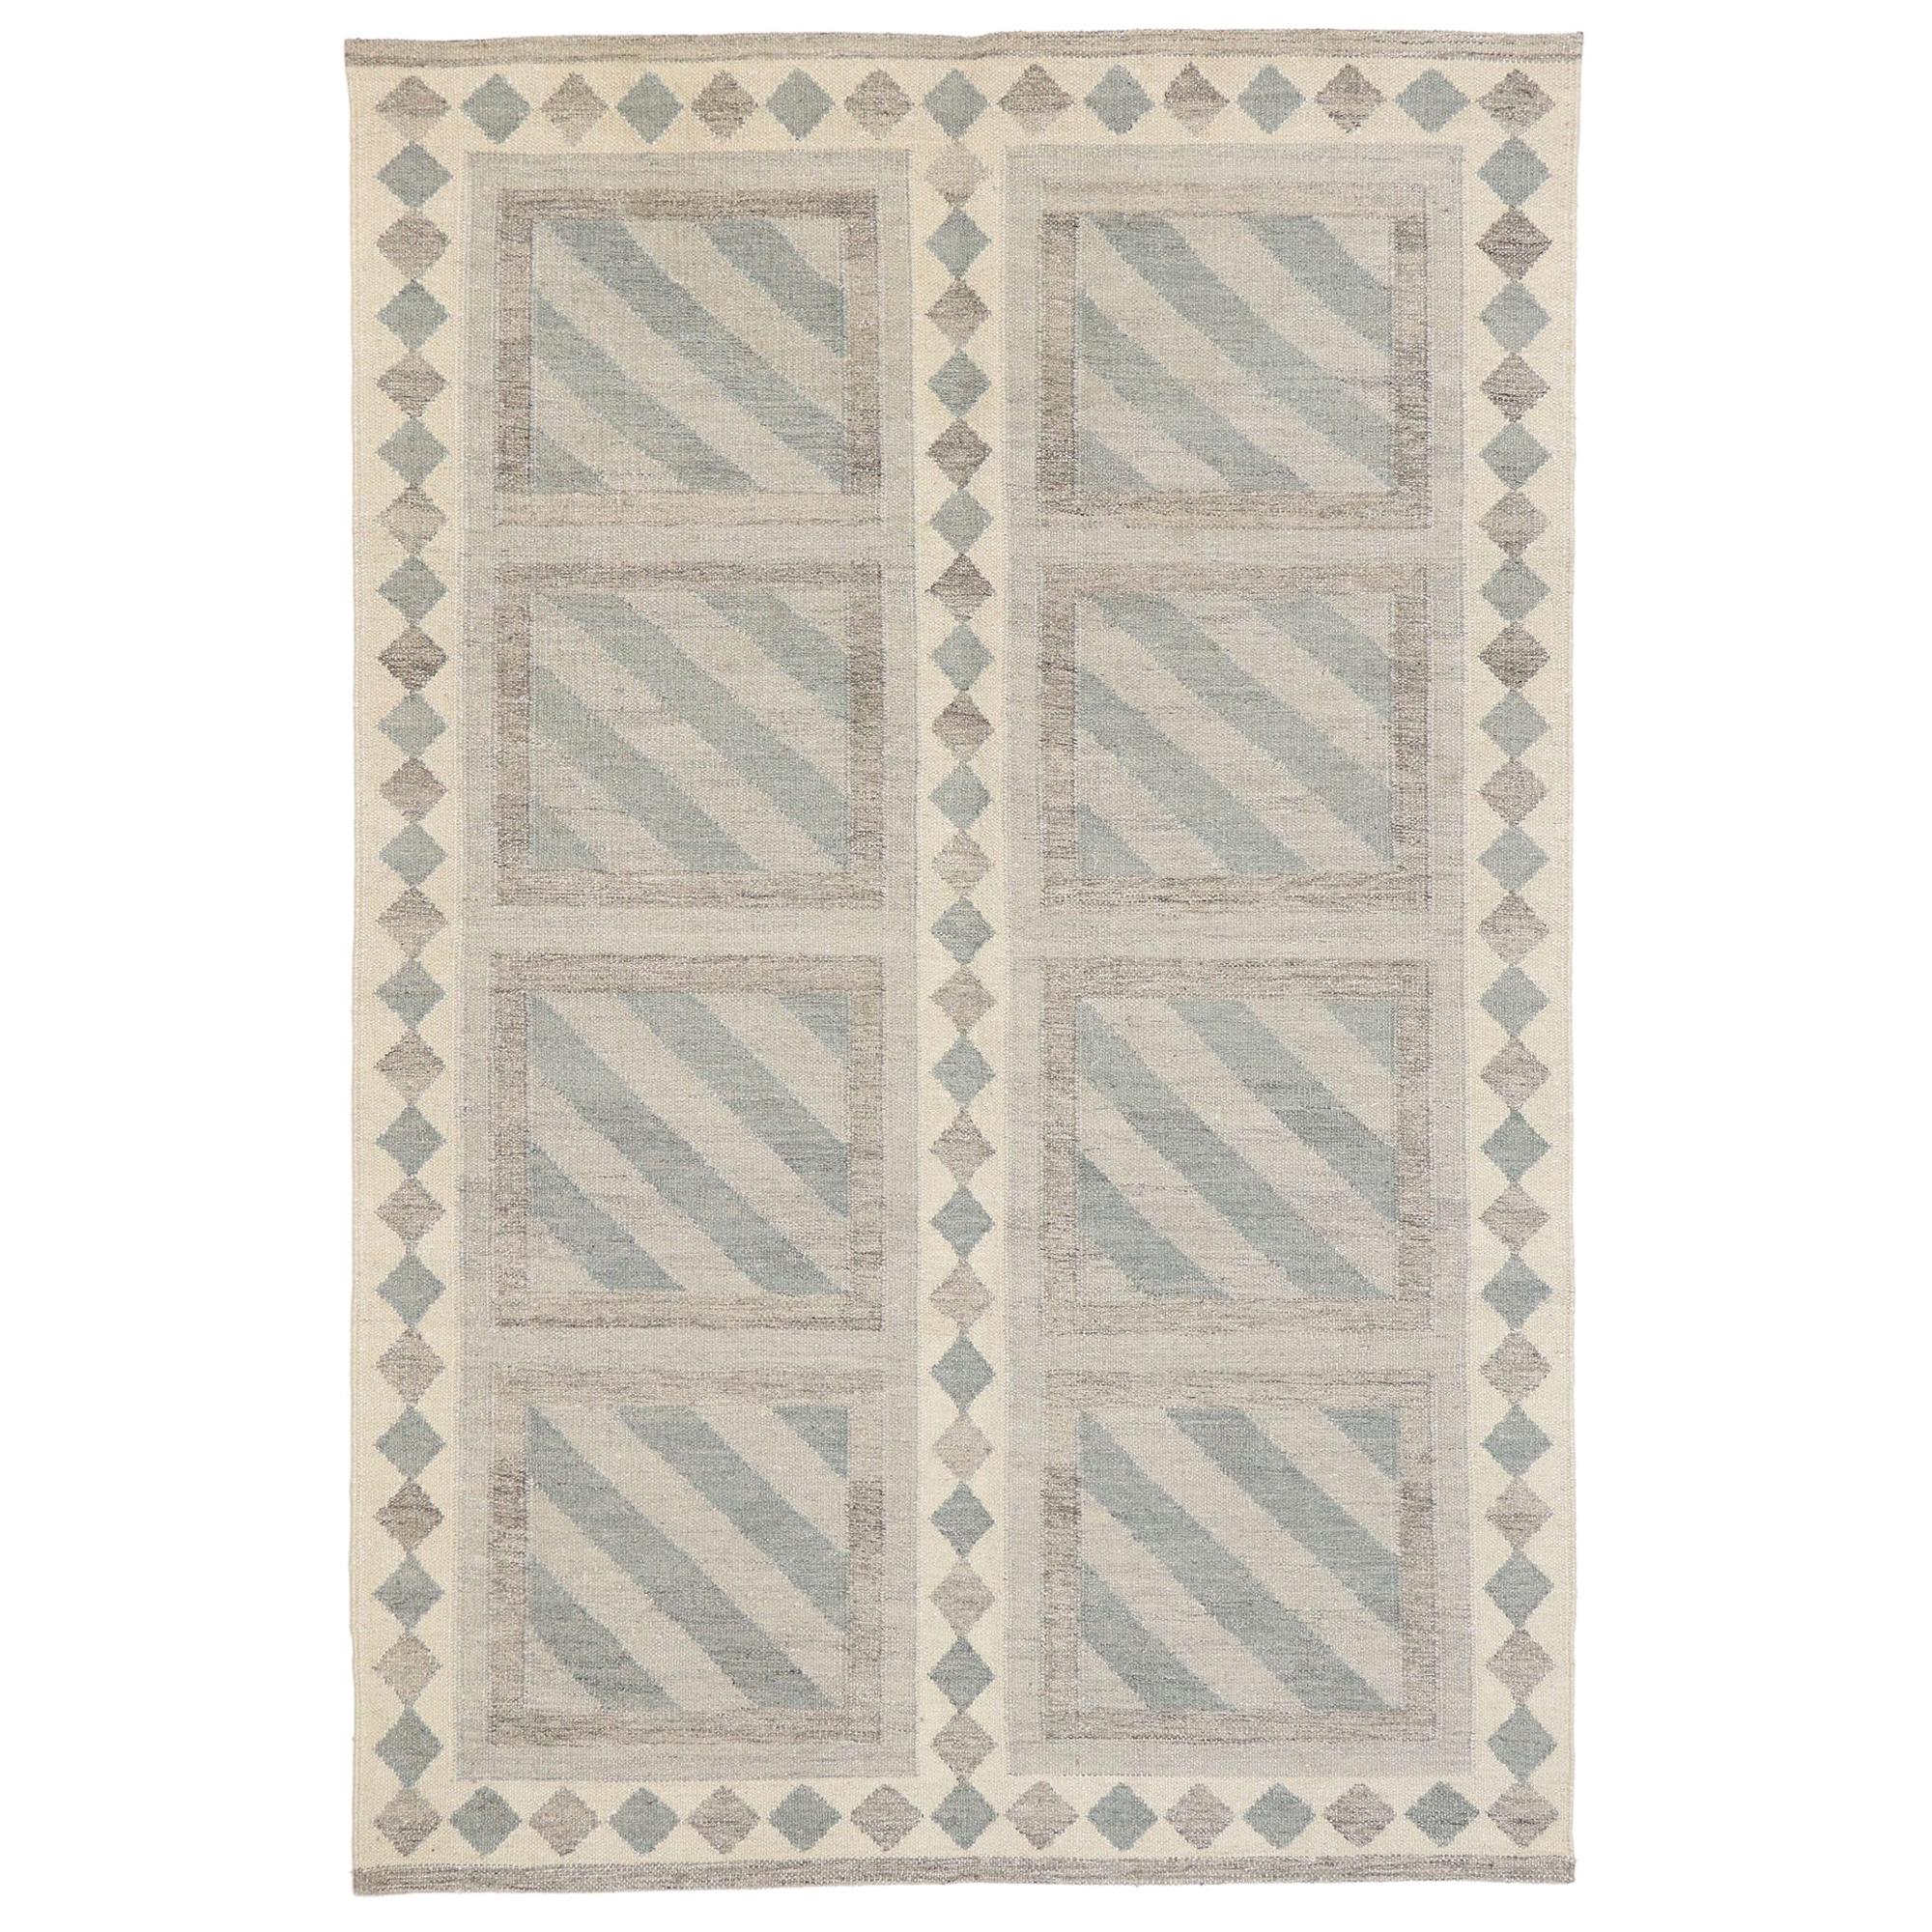 New Contemporary Swedish Inspired Kilim Rug with Scandinavian Modern Style For Sale